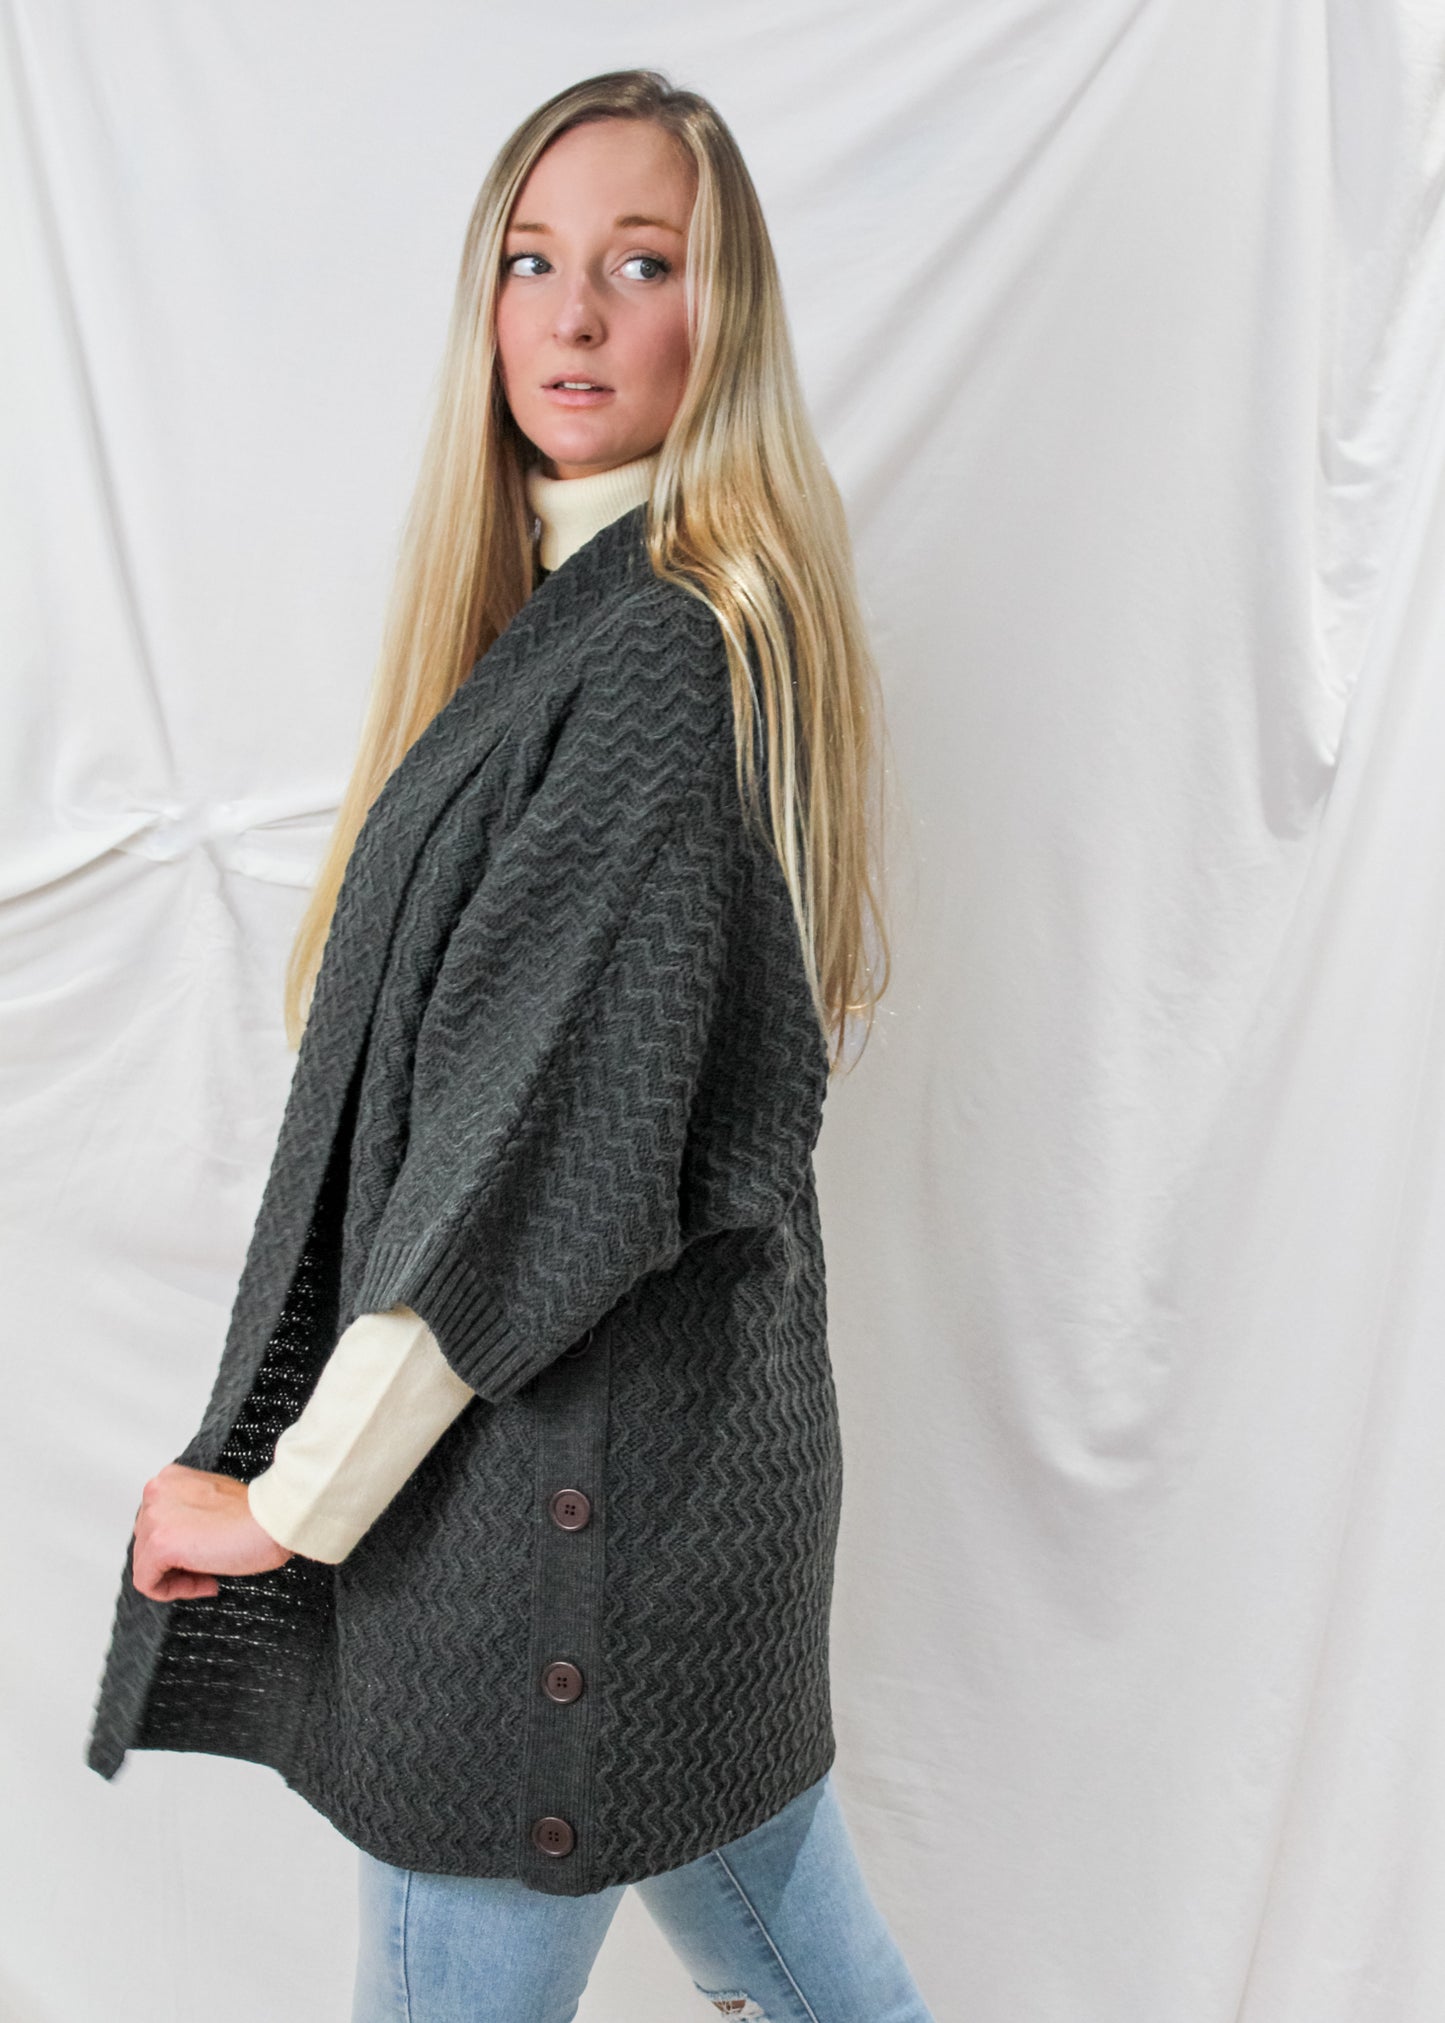 The Knit Cardigan in Grey. Available at Kadou Boutique.